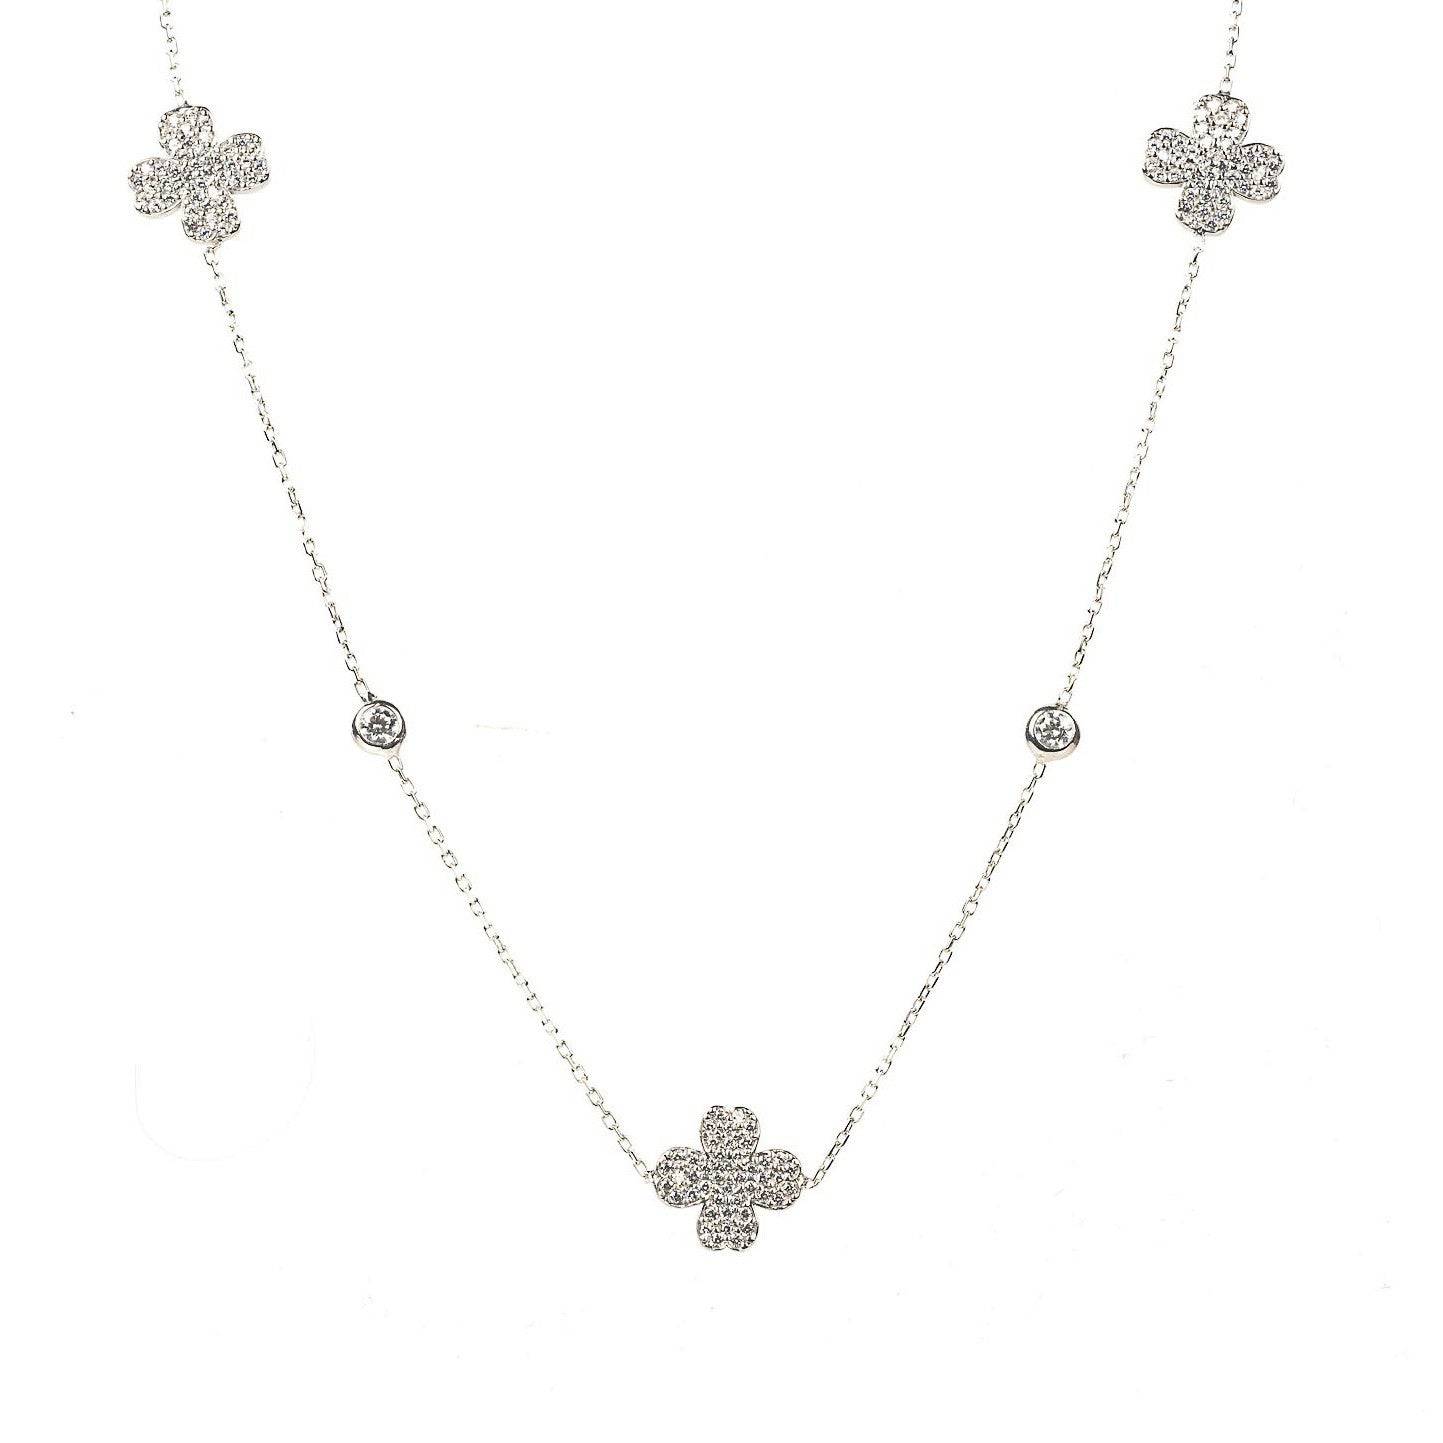 Lucky Four Leaf Clover Necklace Long Silver - LATELITA Necklaces